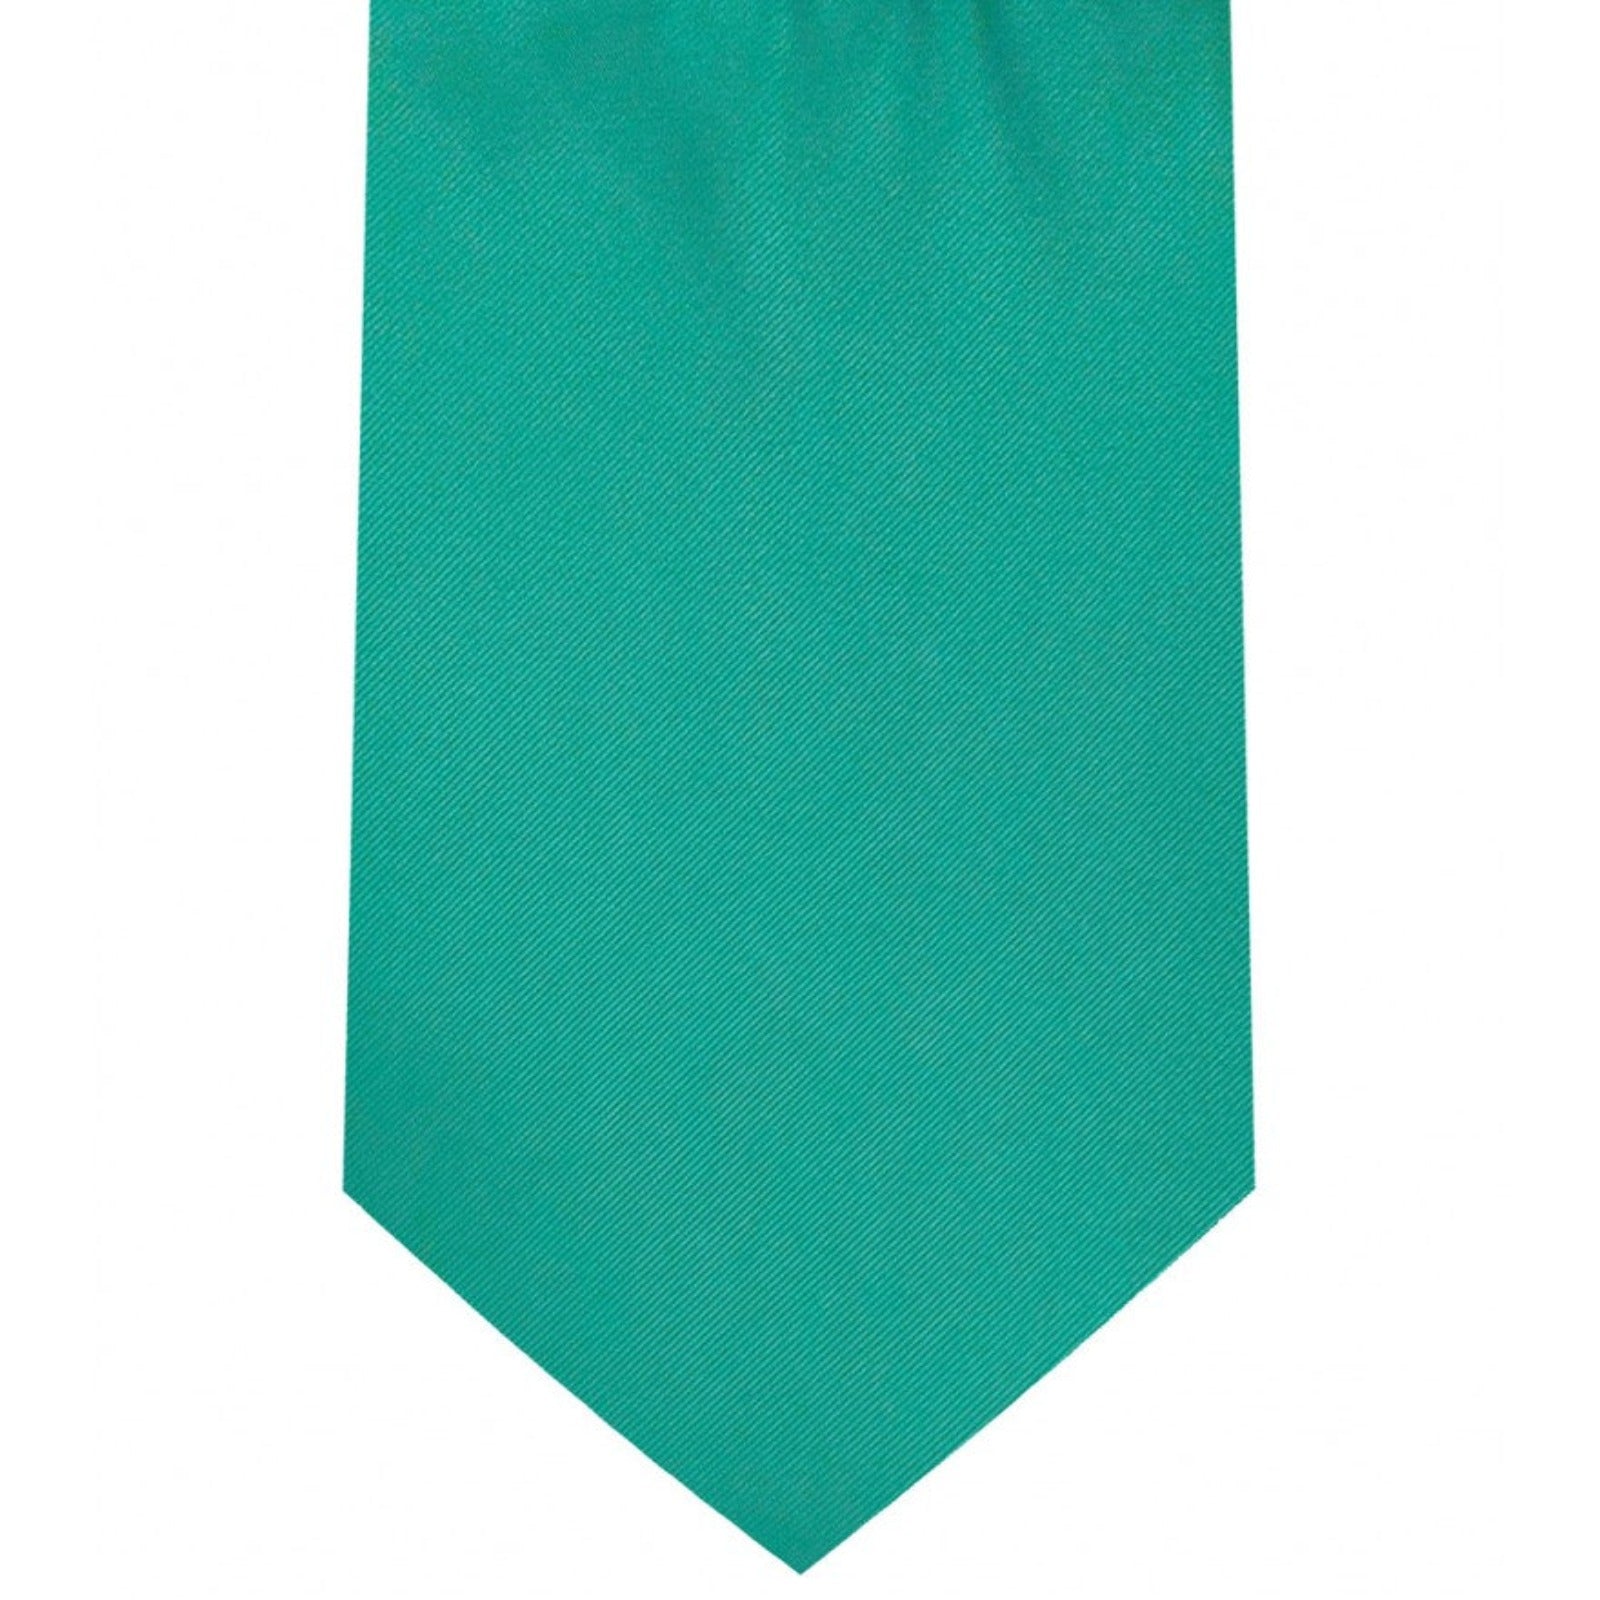 Classic Mermaid Green Tie Regular width 3.5 inches With Matching Pocket Square | KCT Menswea